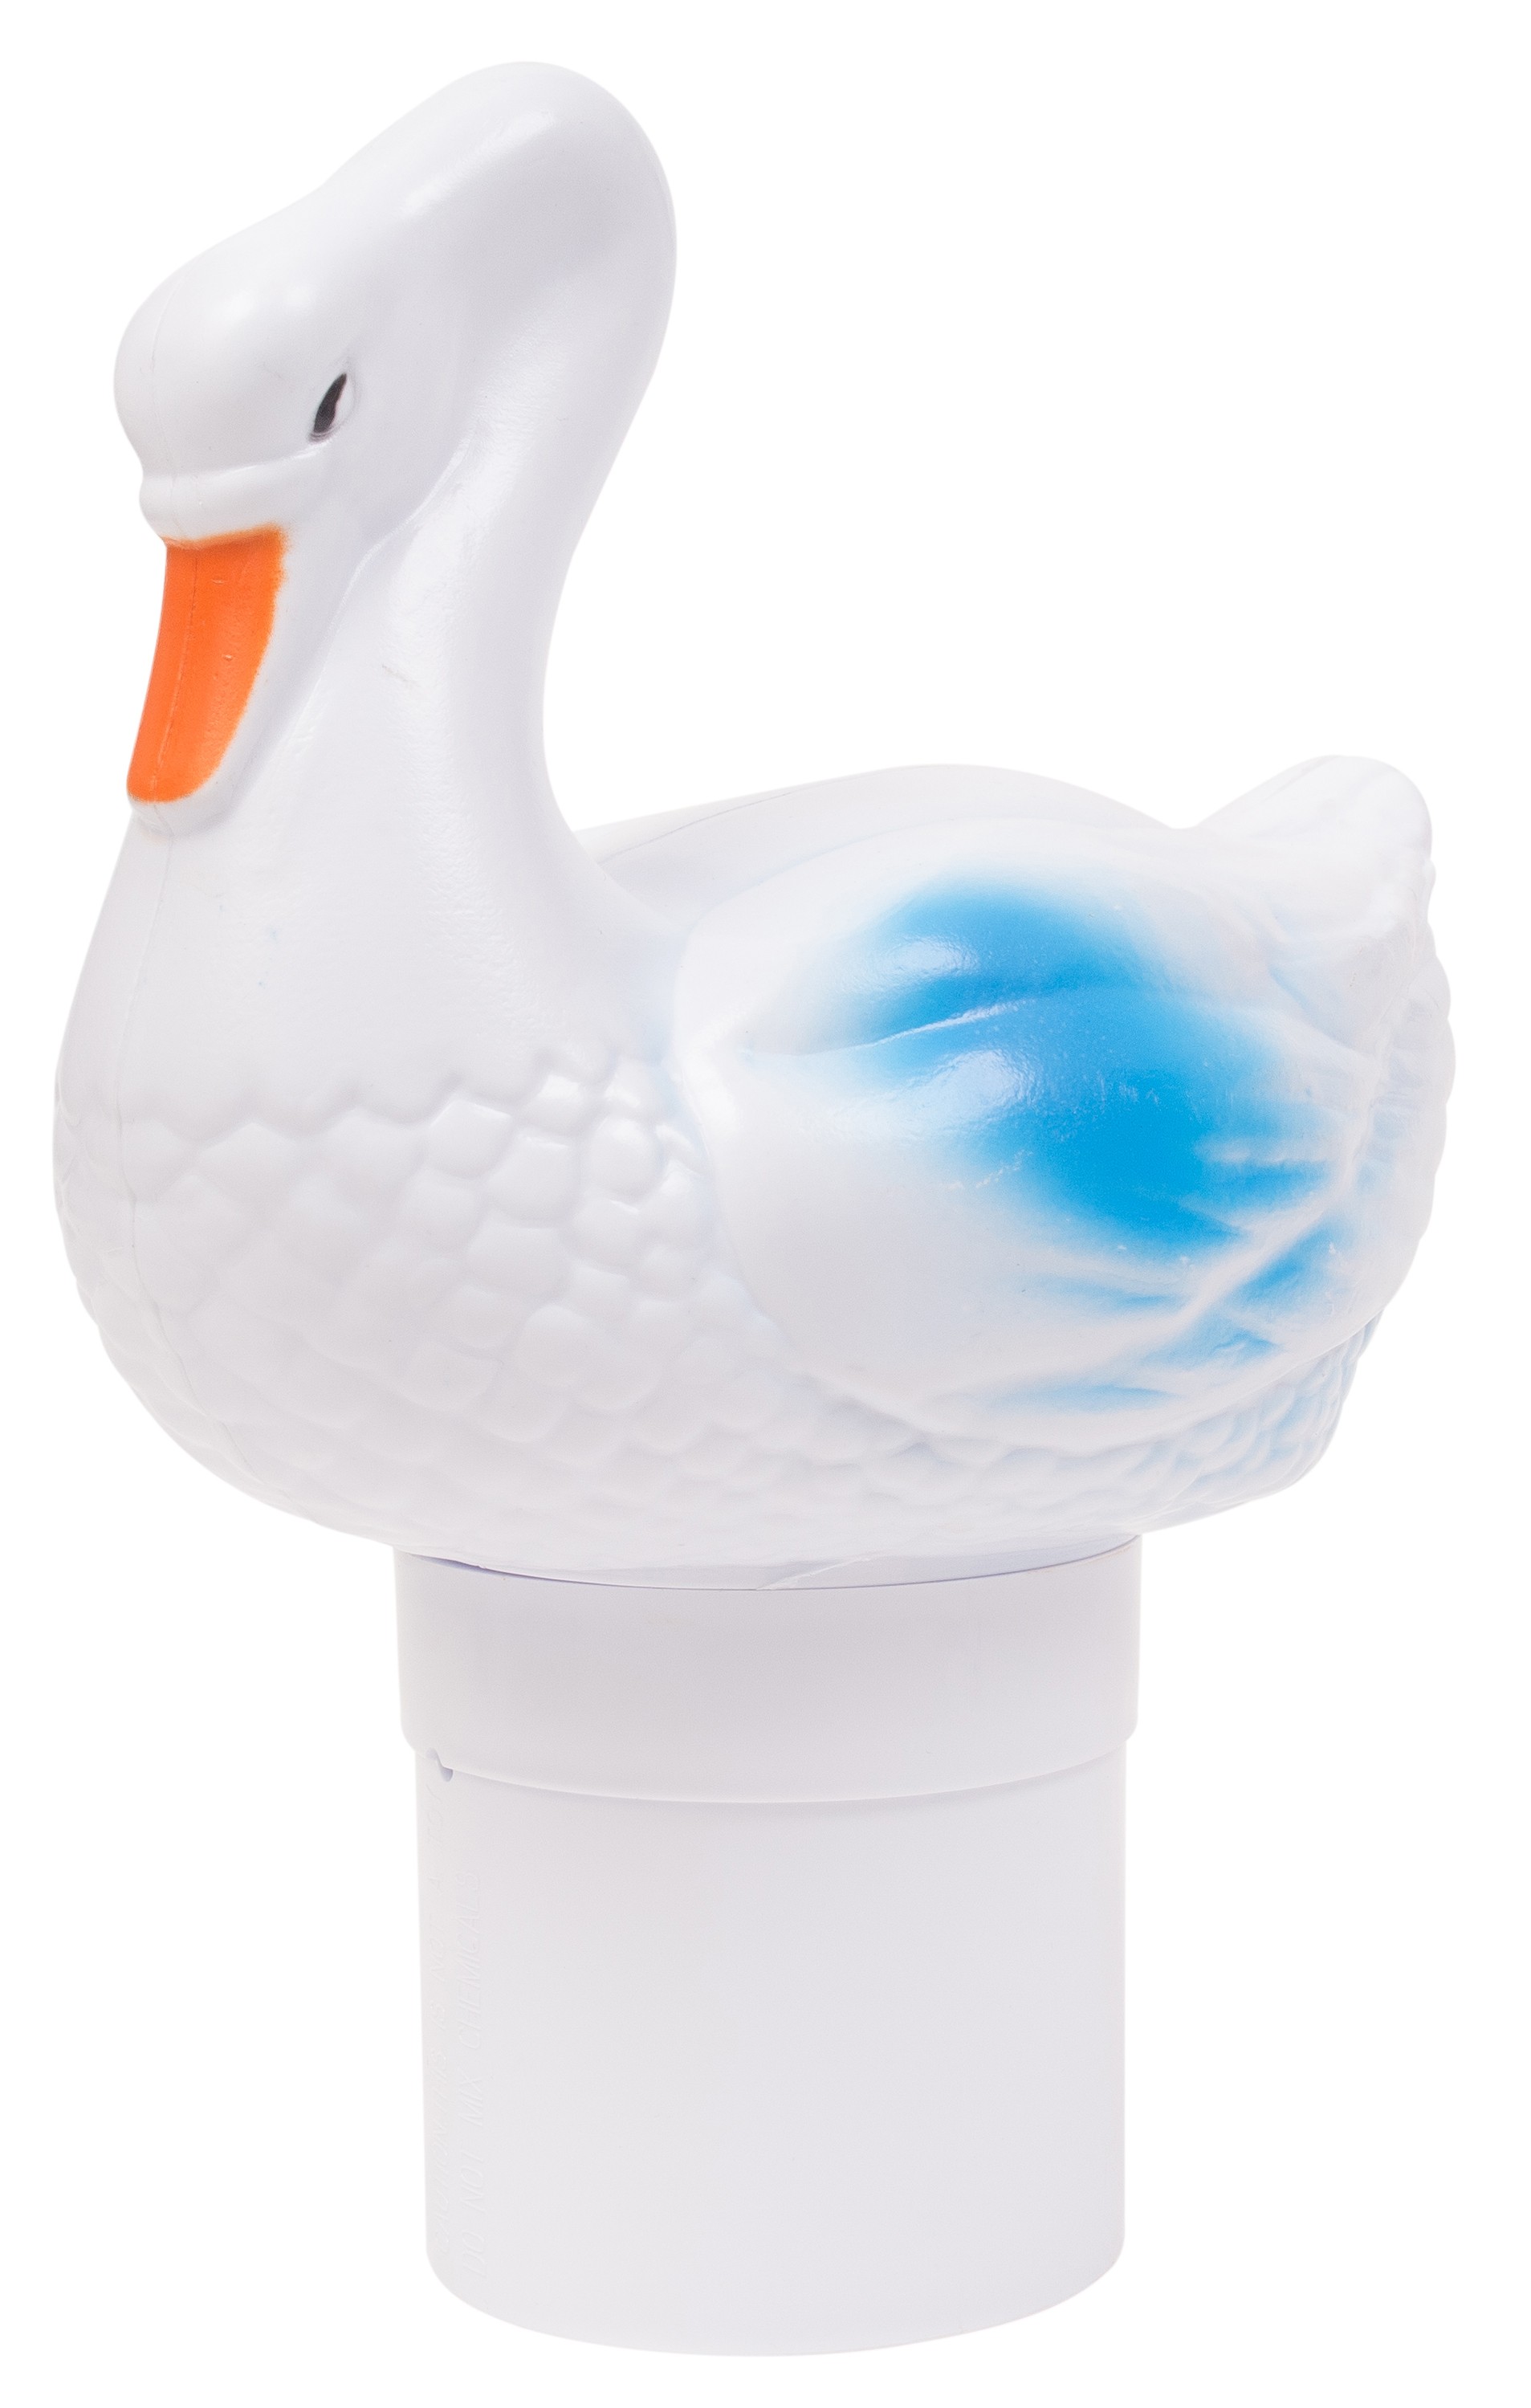 Floating Chlorine Bromine Dispenser for Swimming Pools Shaped as a Swan